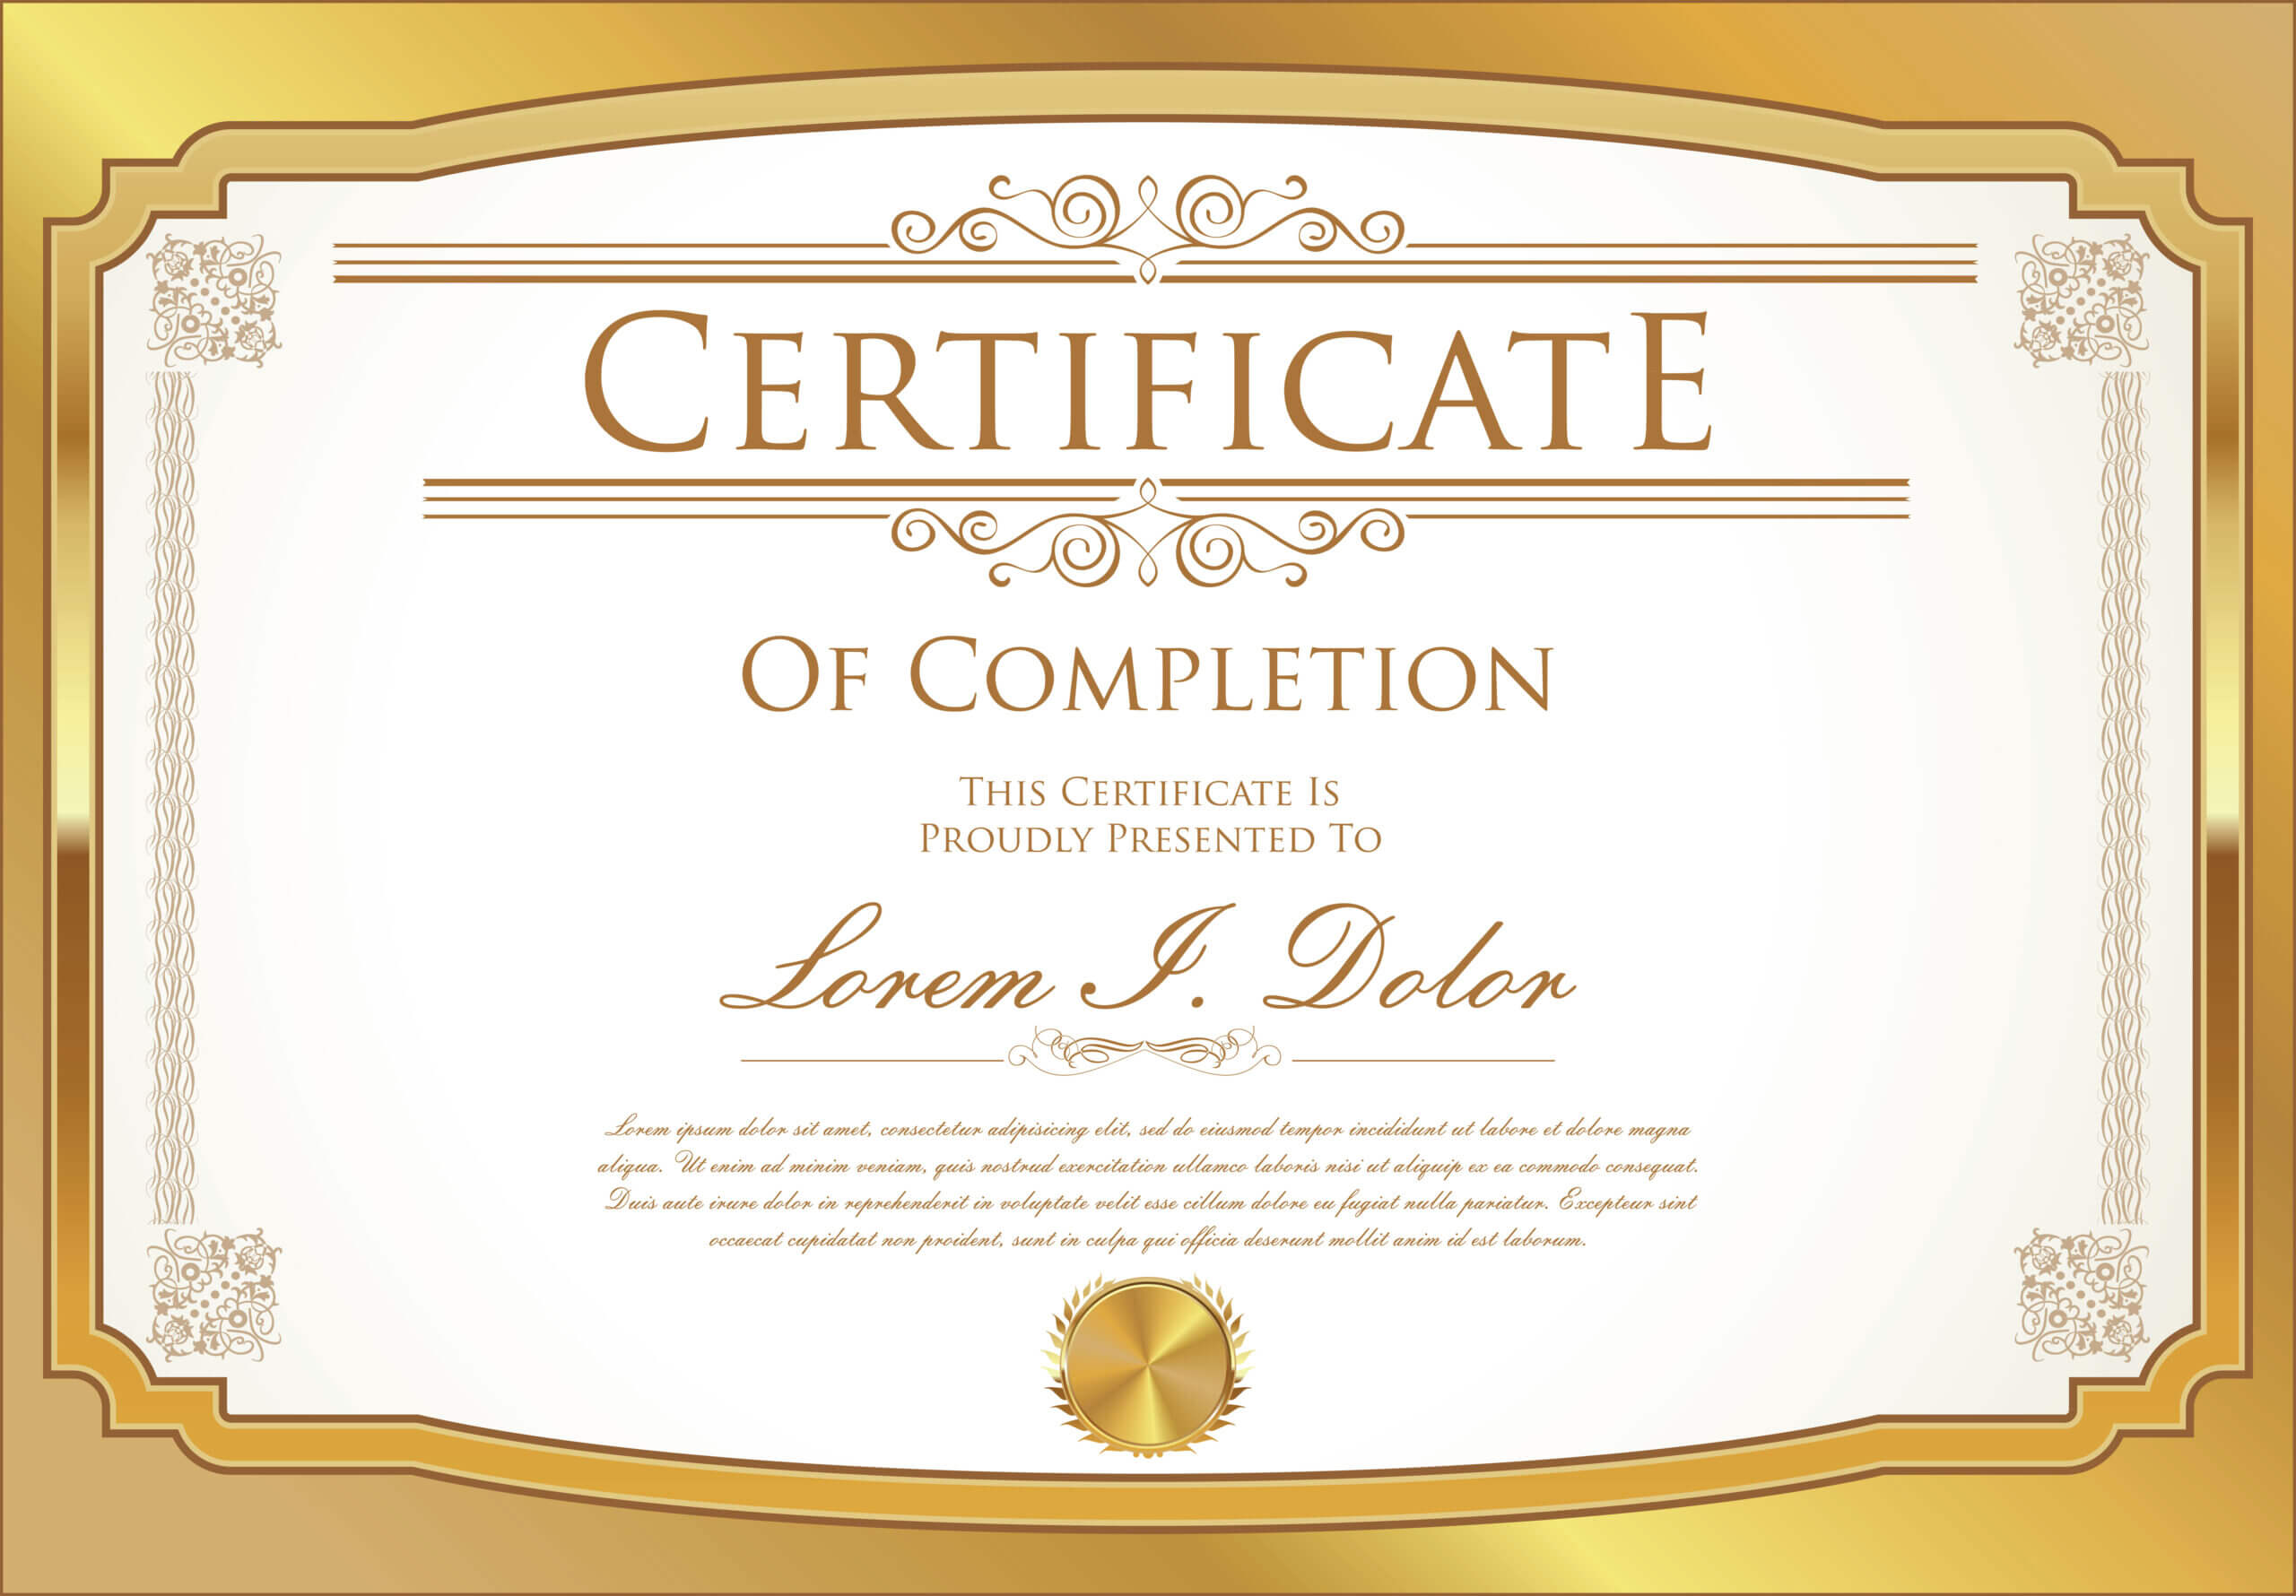 Certificate Template - Download Free Vectors, Clipart Within Commemorative Certificate Template